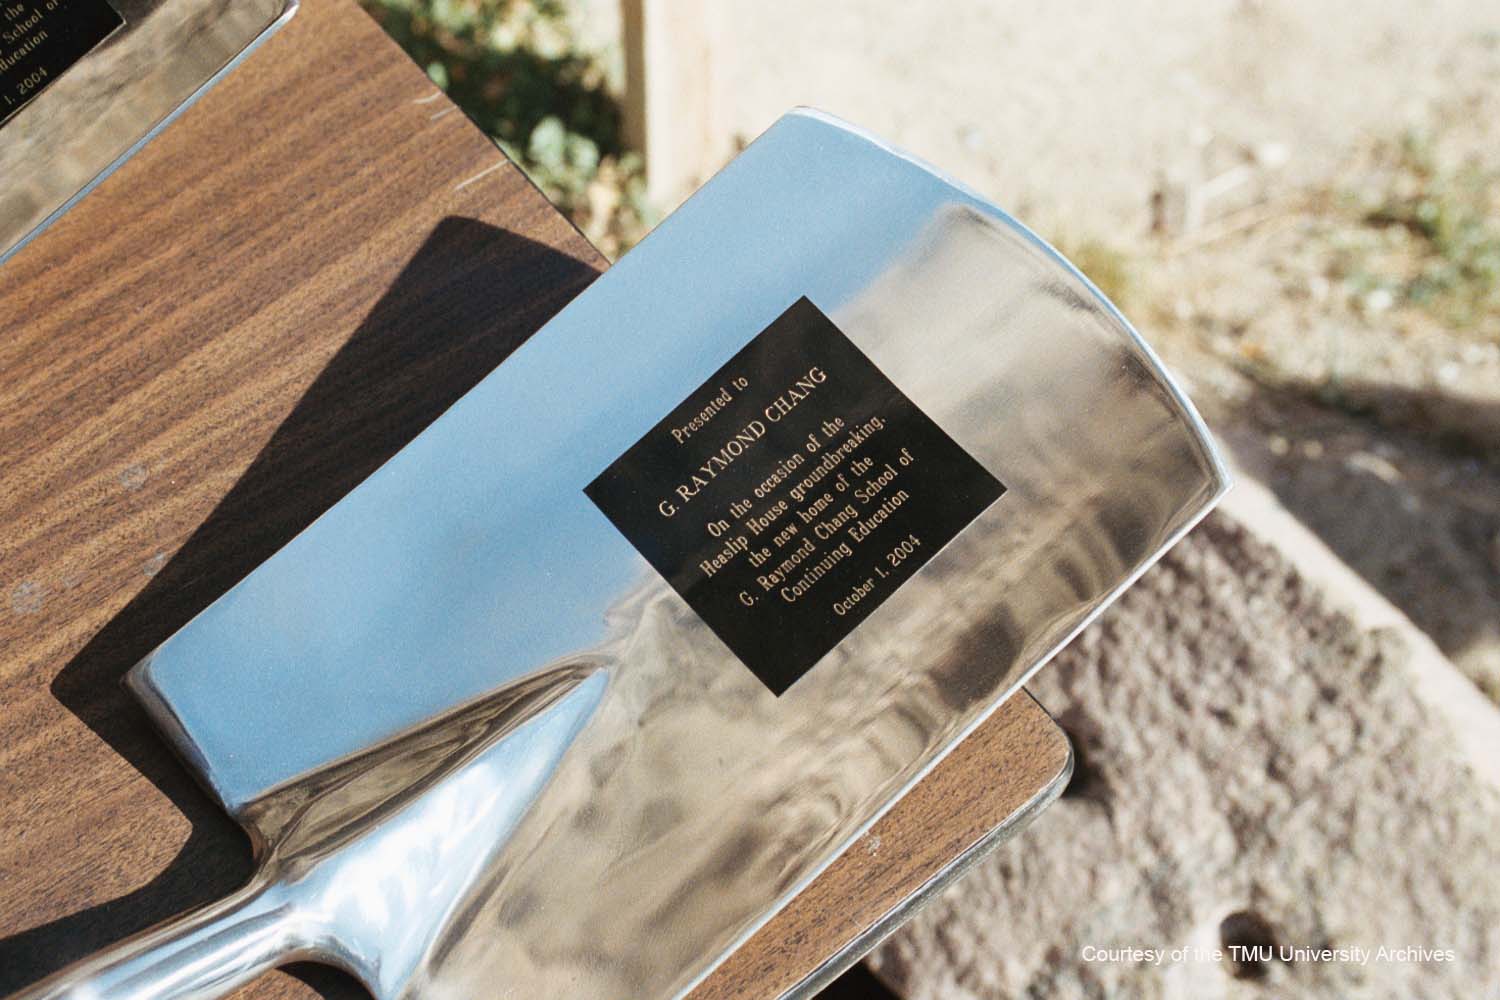 A shiny shovel with an inscription dated Oct. 1, 2004, presented to G. Raymond Chang.